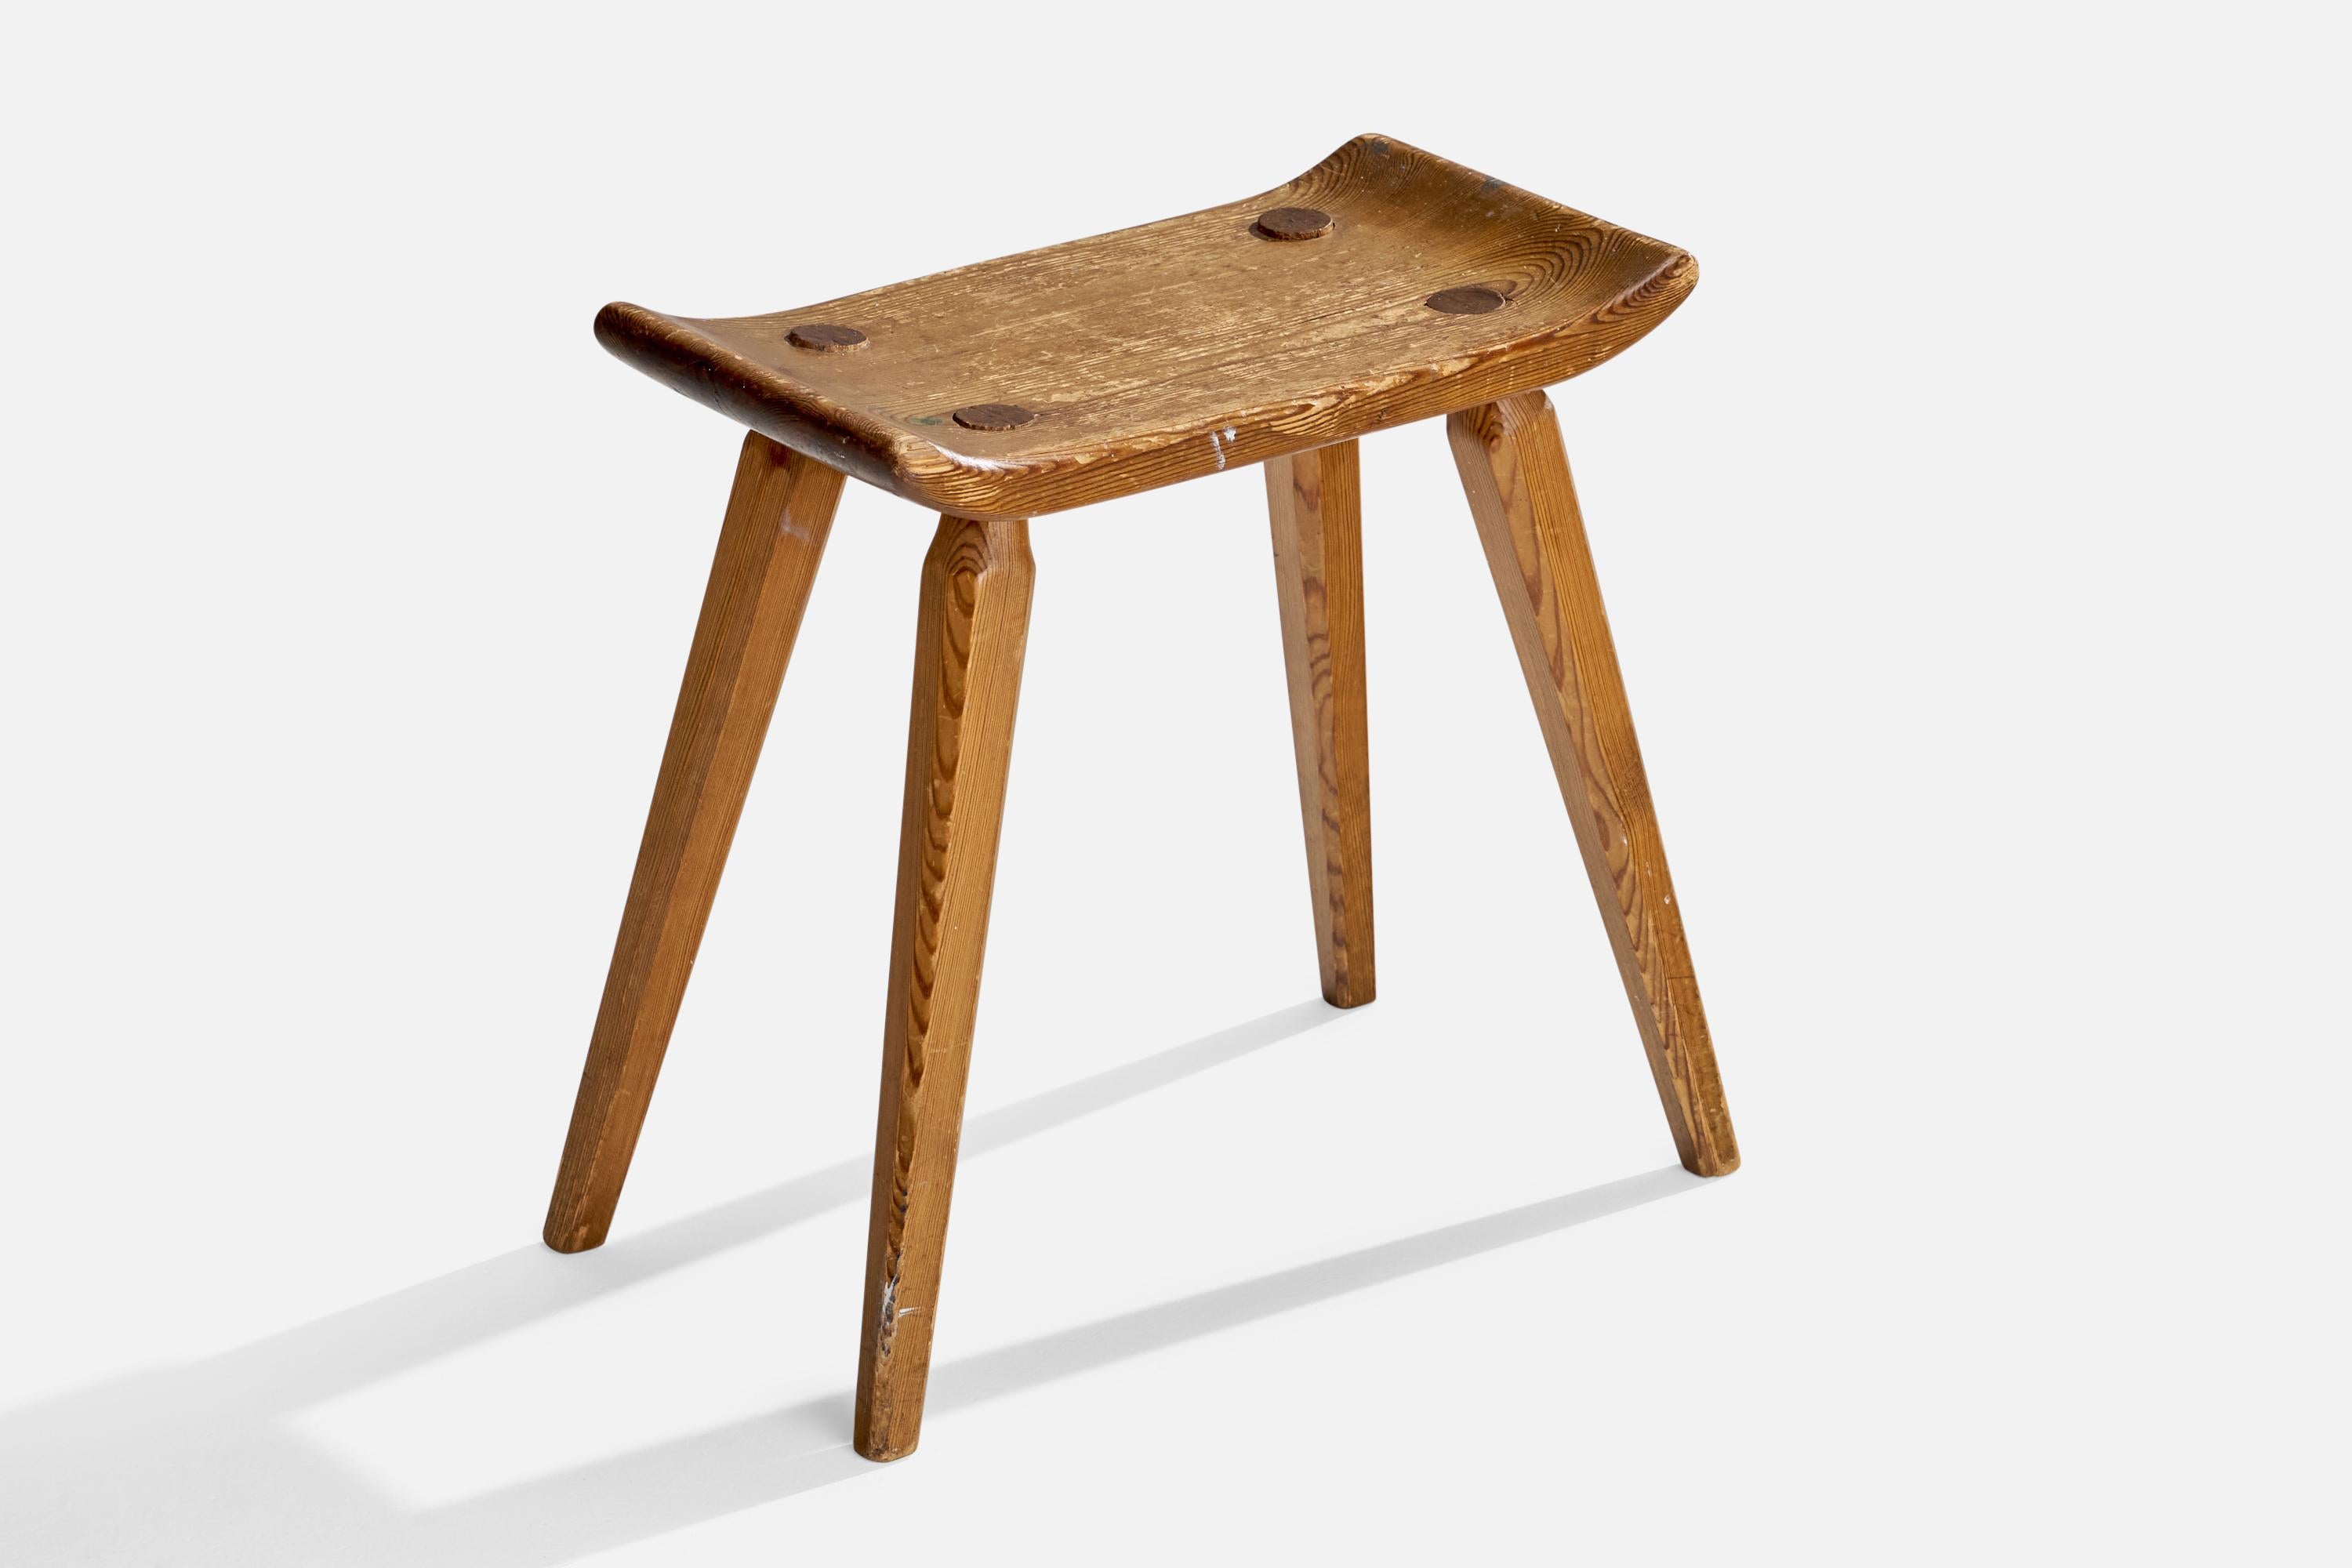 A pine stool designed and produced in Sweden, c. 1950s.

Seat height 16”